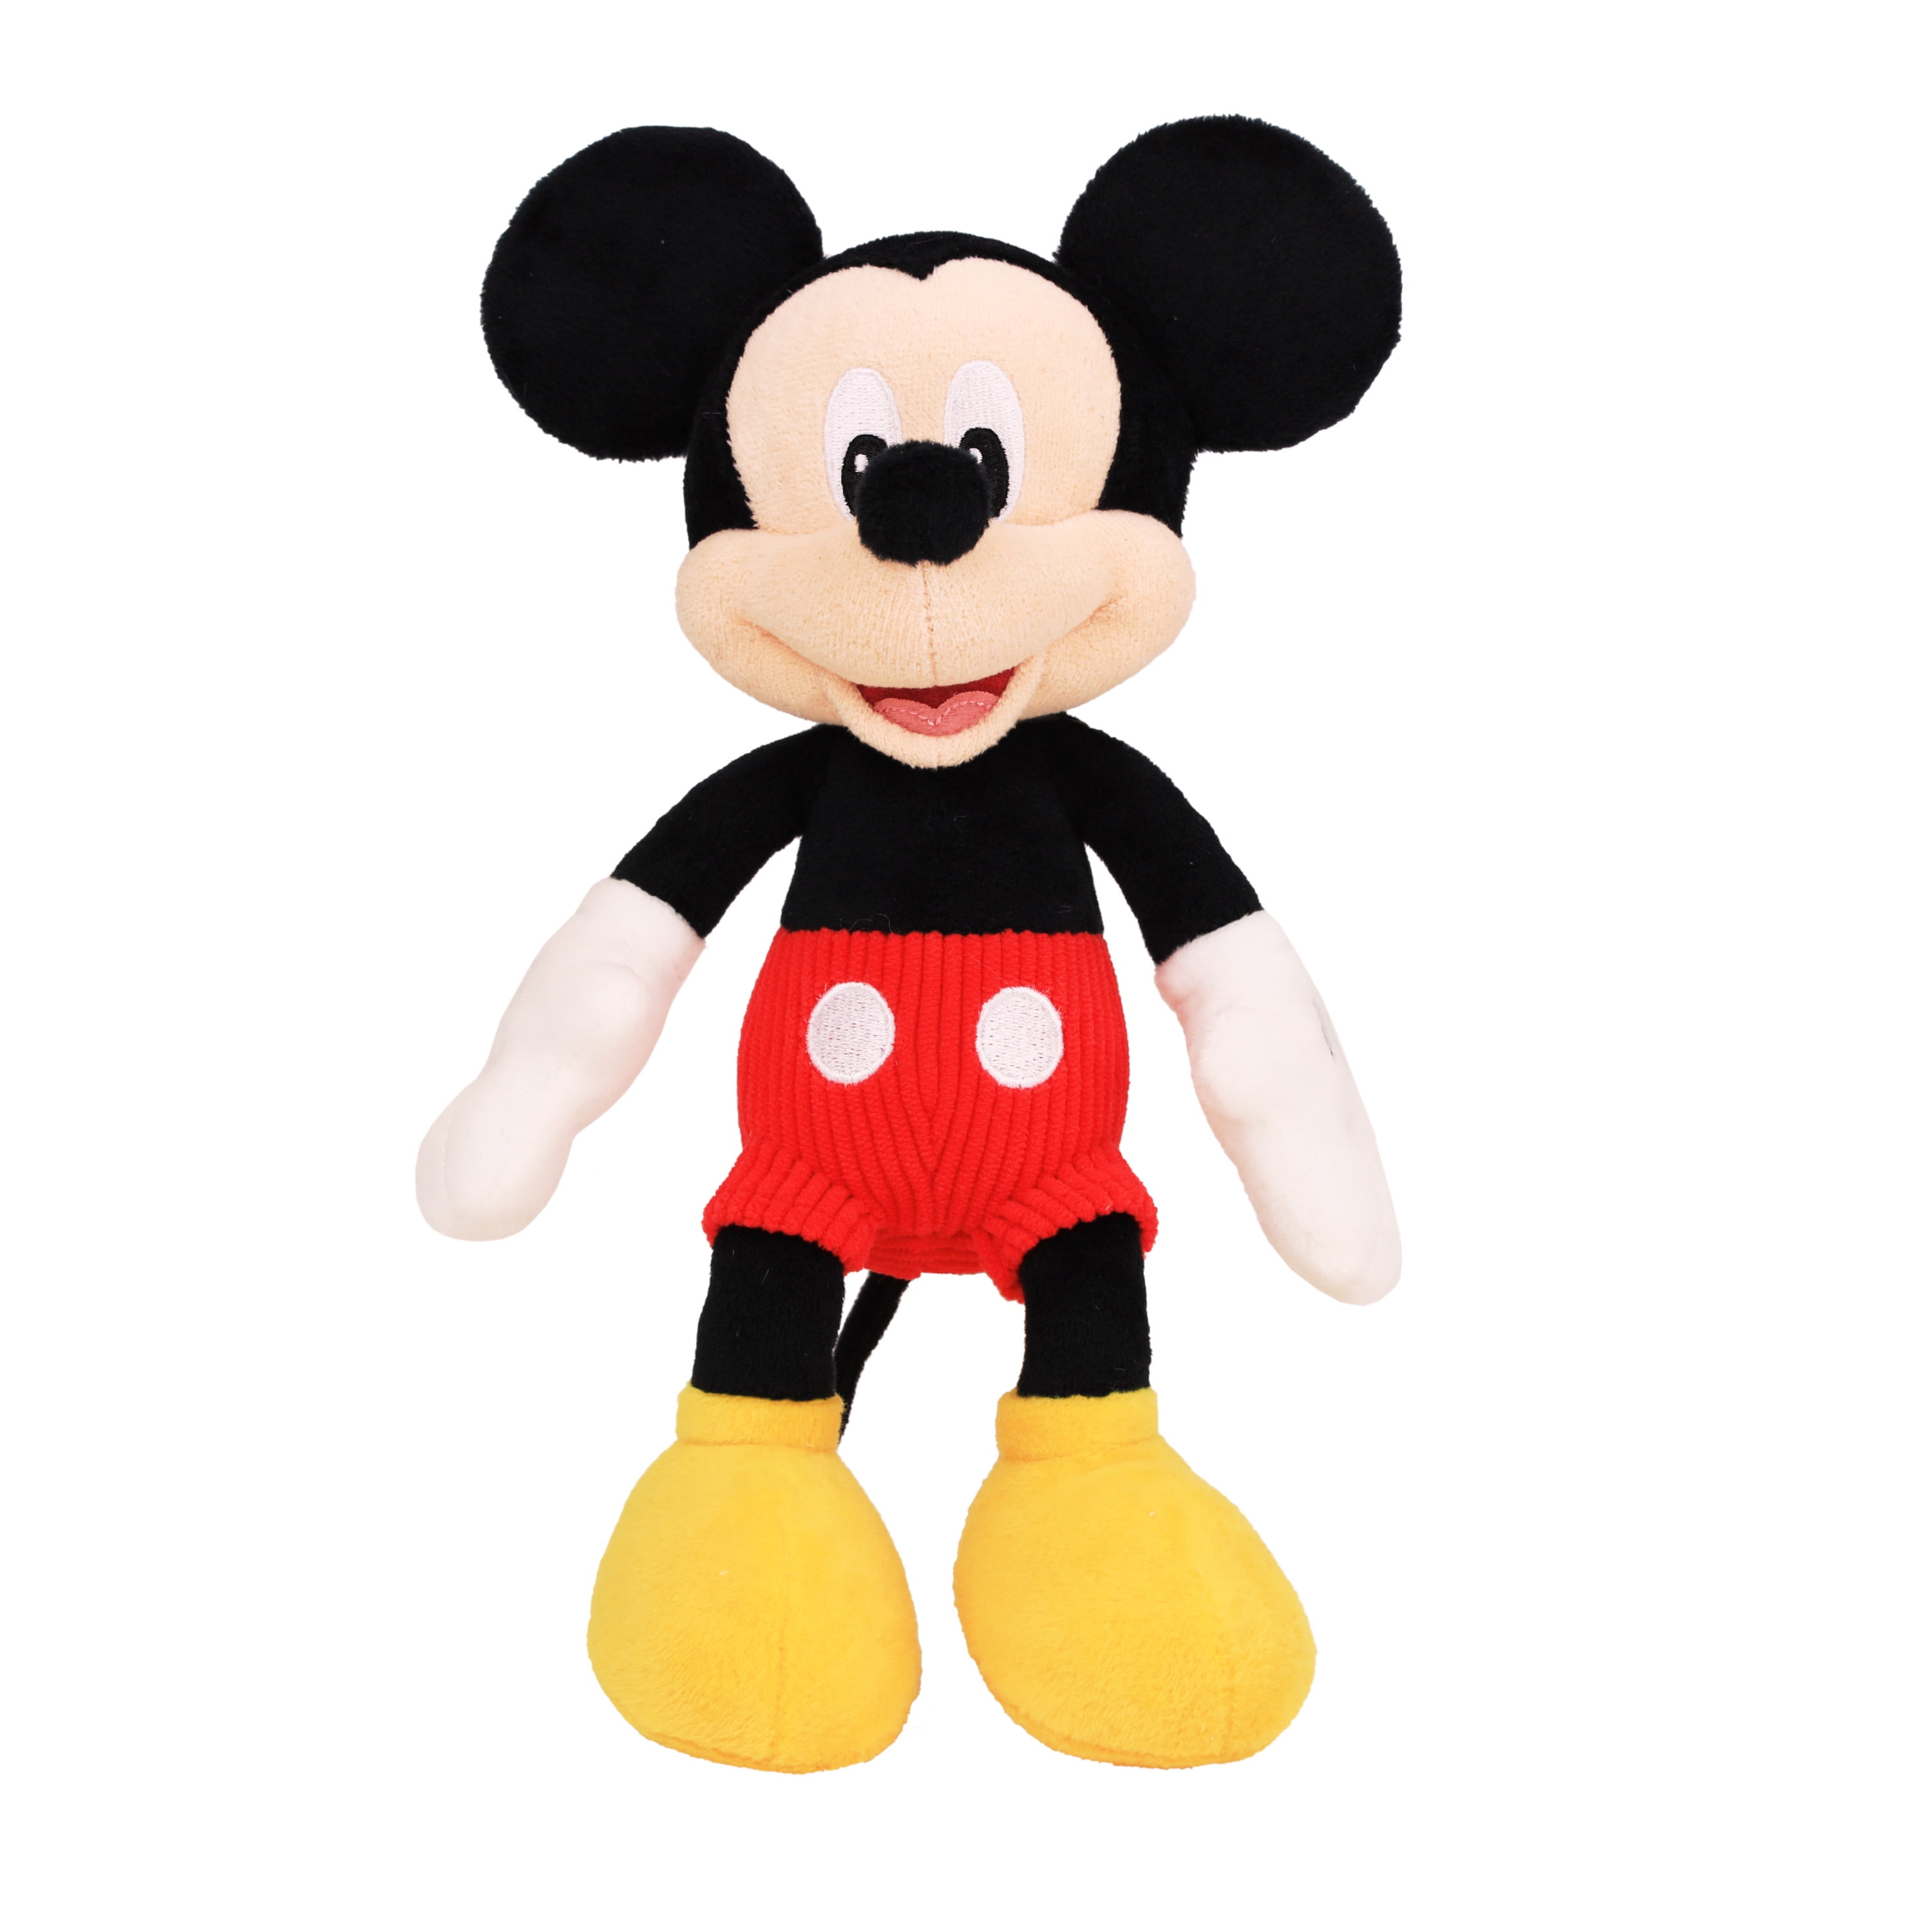 Disney Store Authentic Mickey Mouse Soft Plush Toy in Pouch New Born Baby Gift 